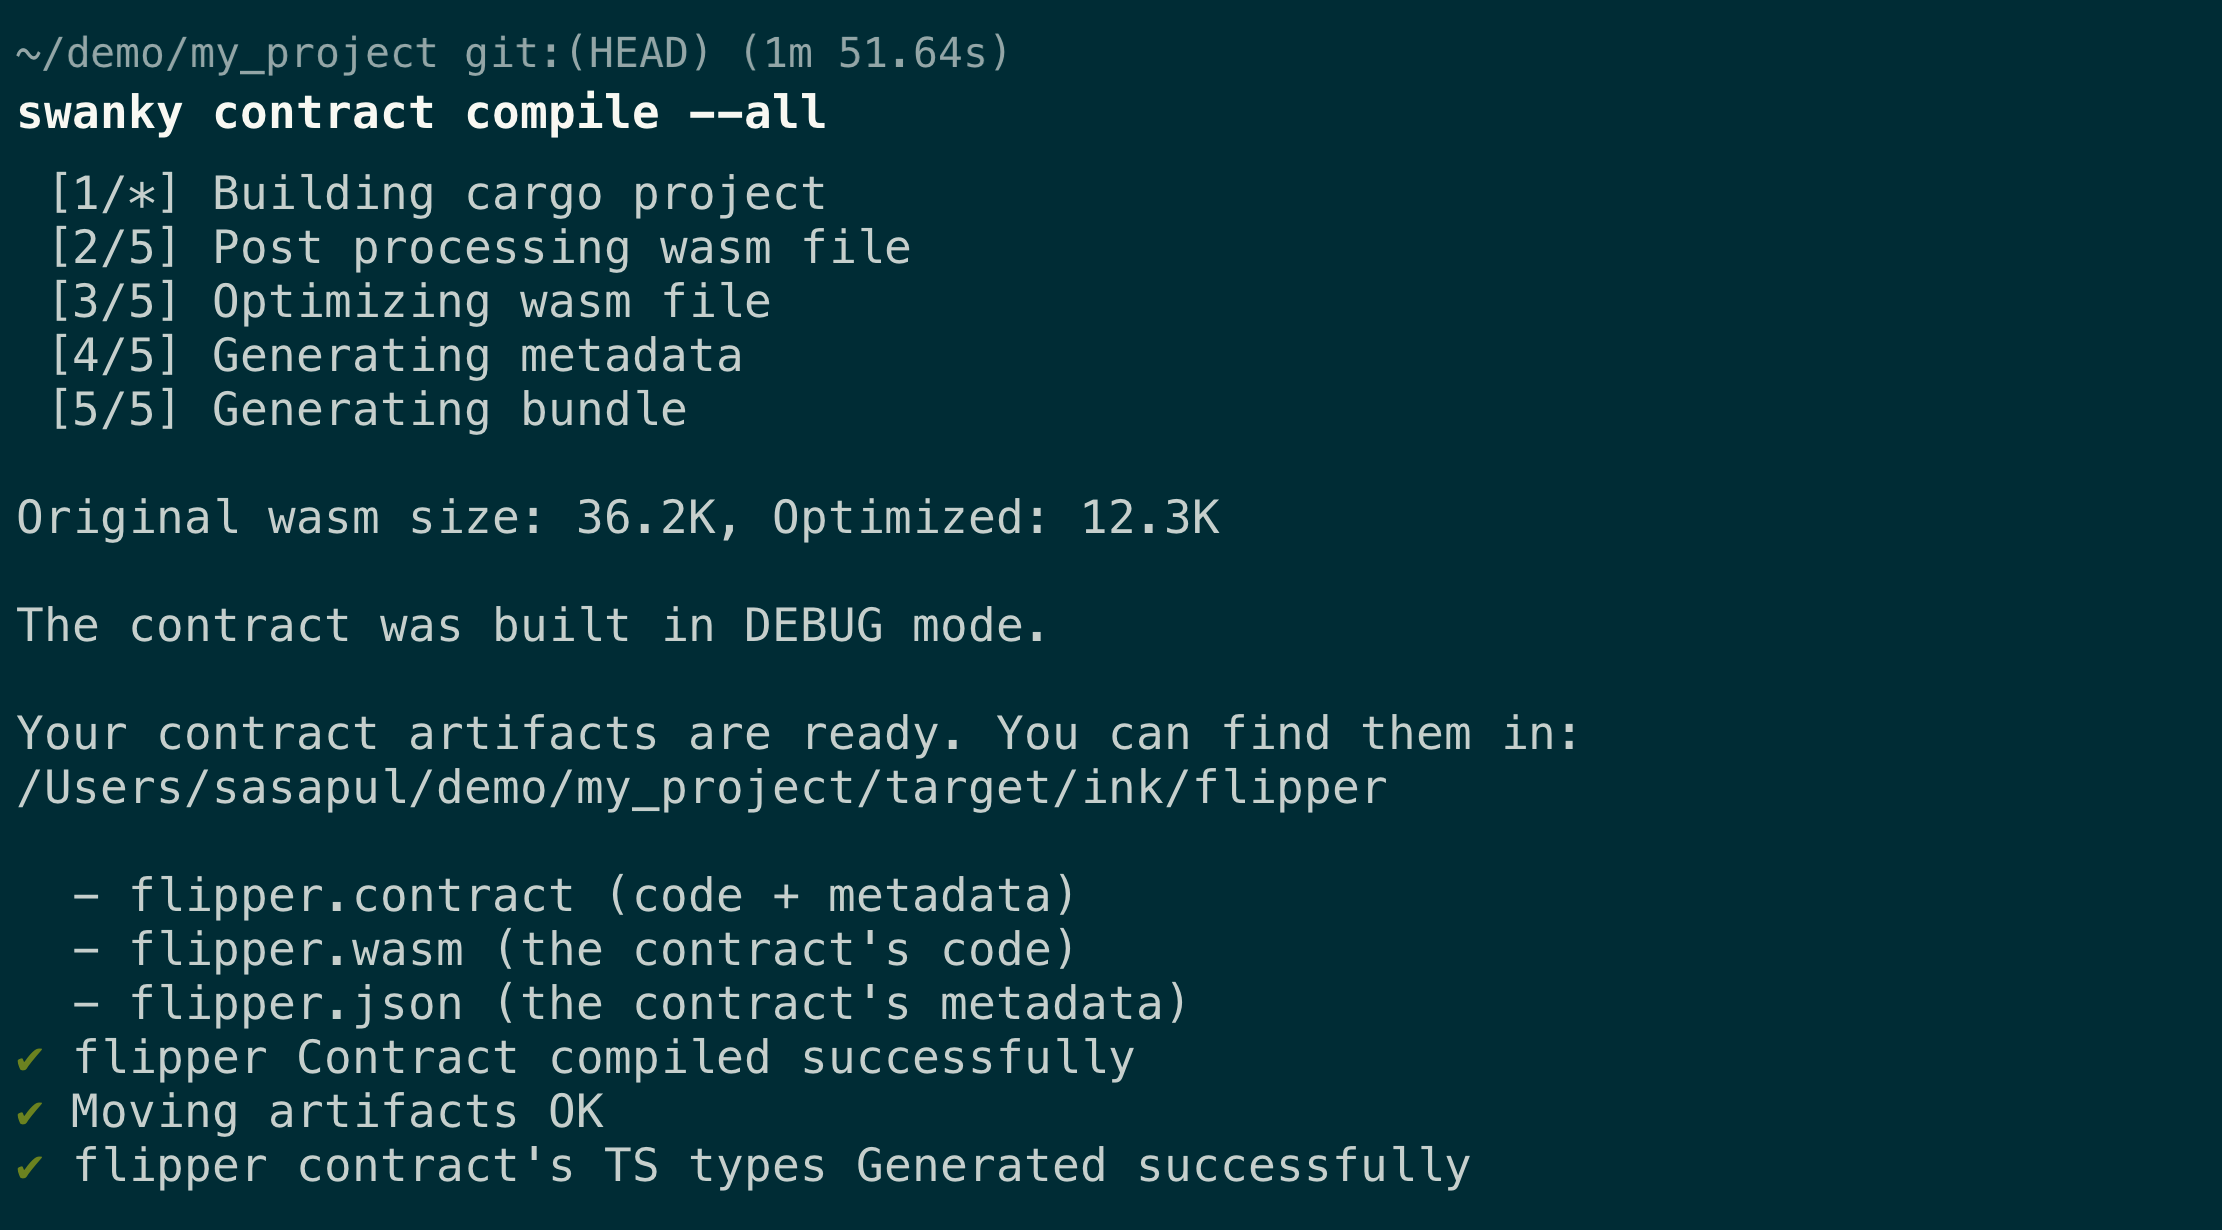 Compile all contracts